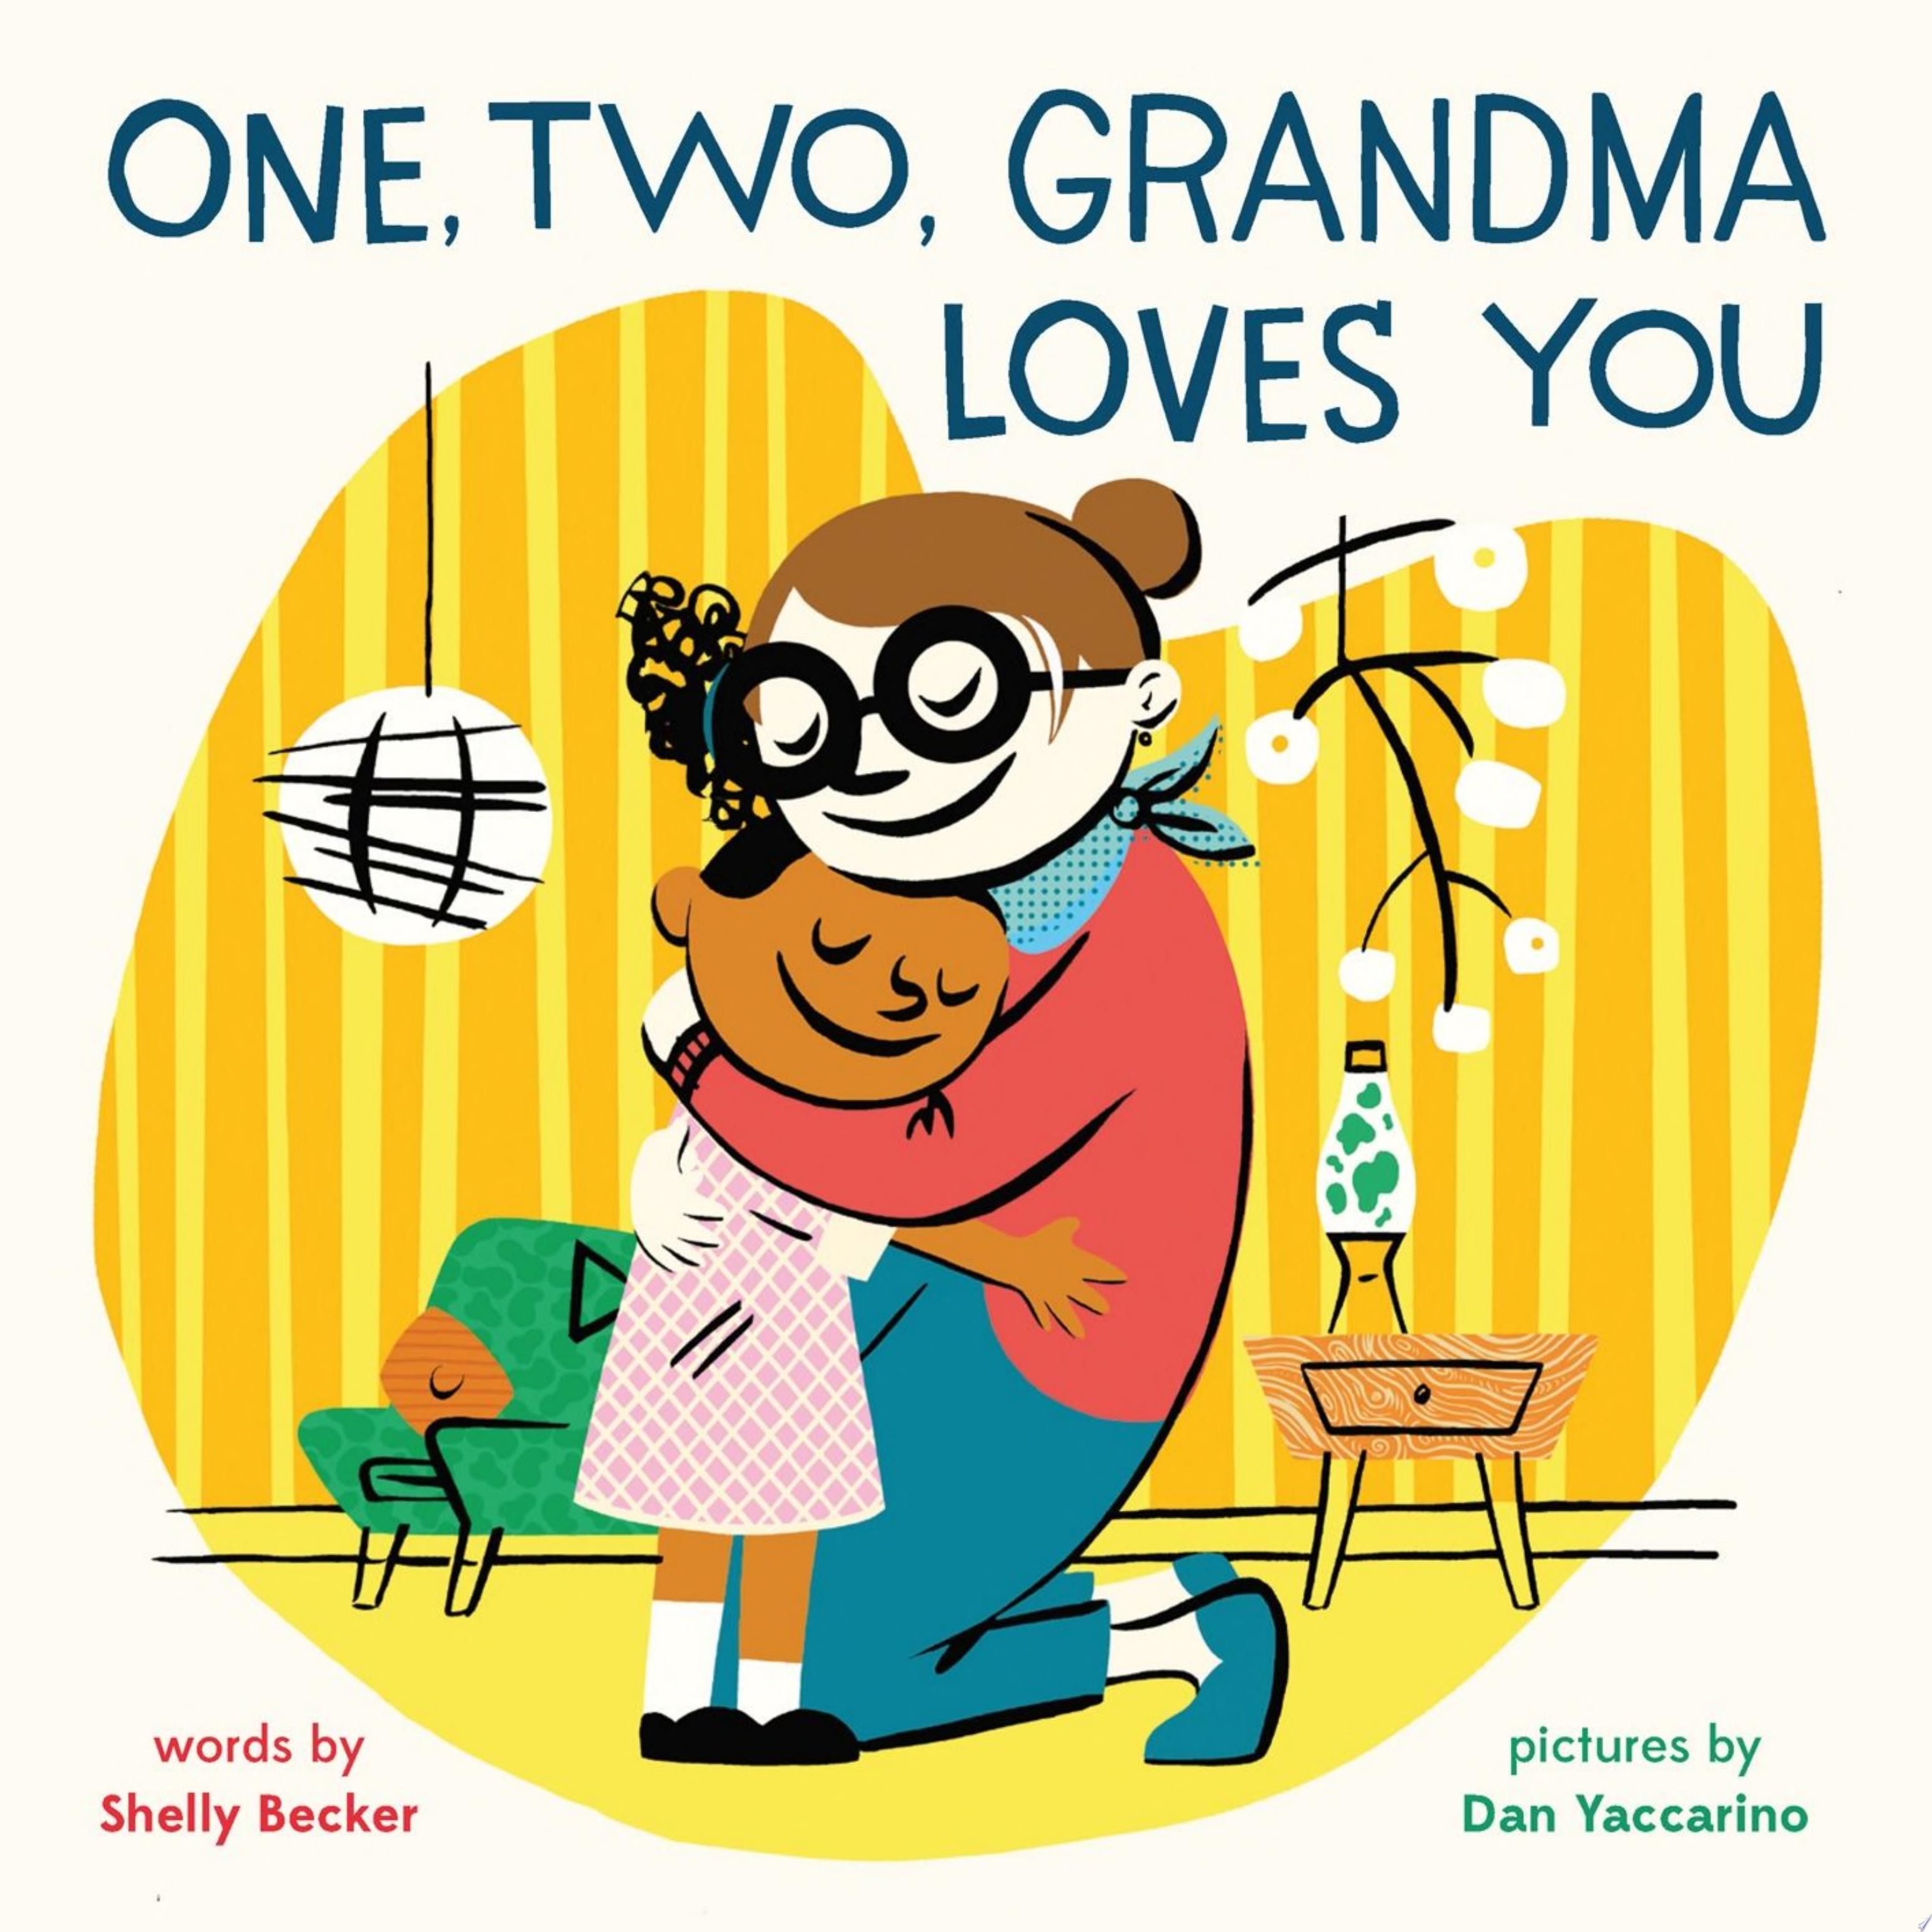 Image for "One, Two, Grandma Loves You"